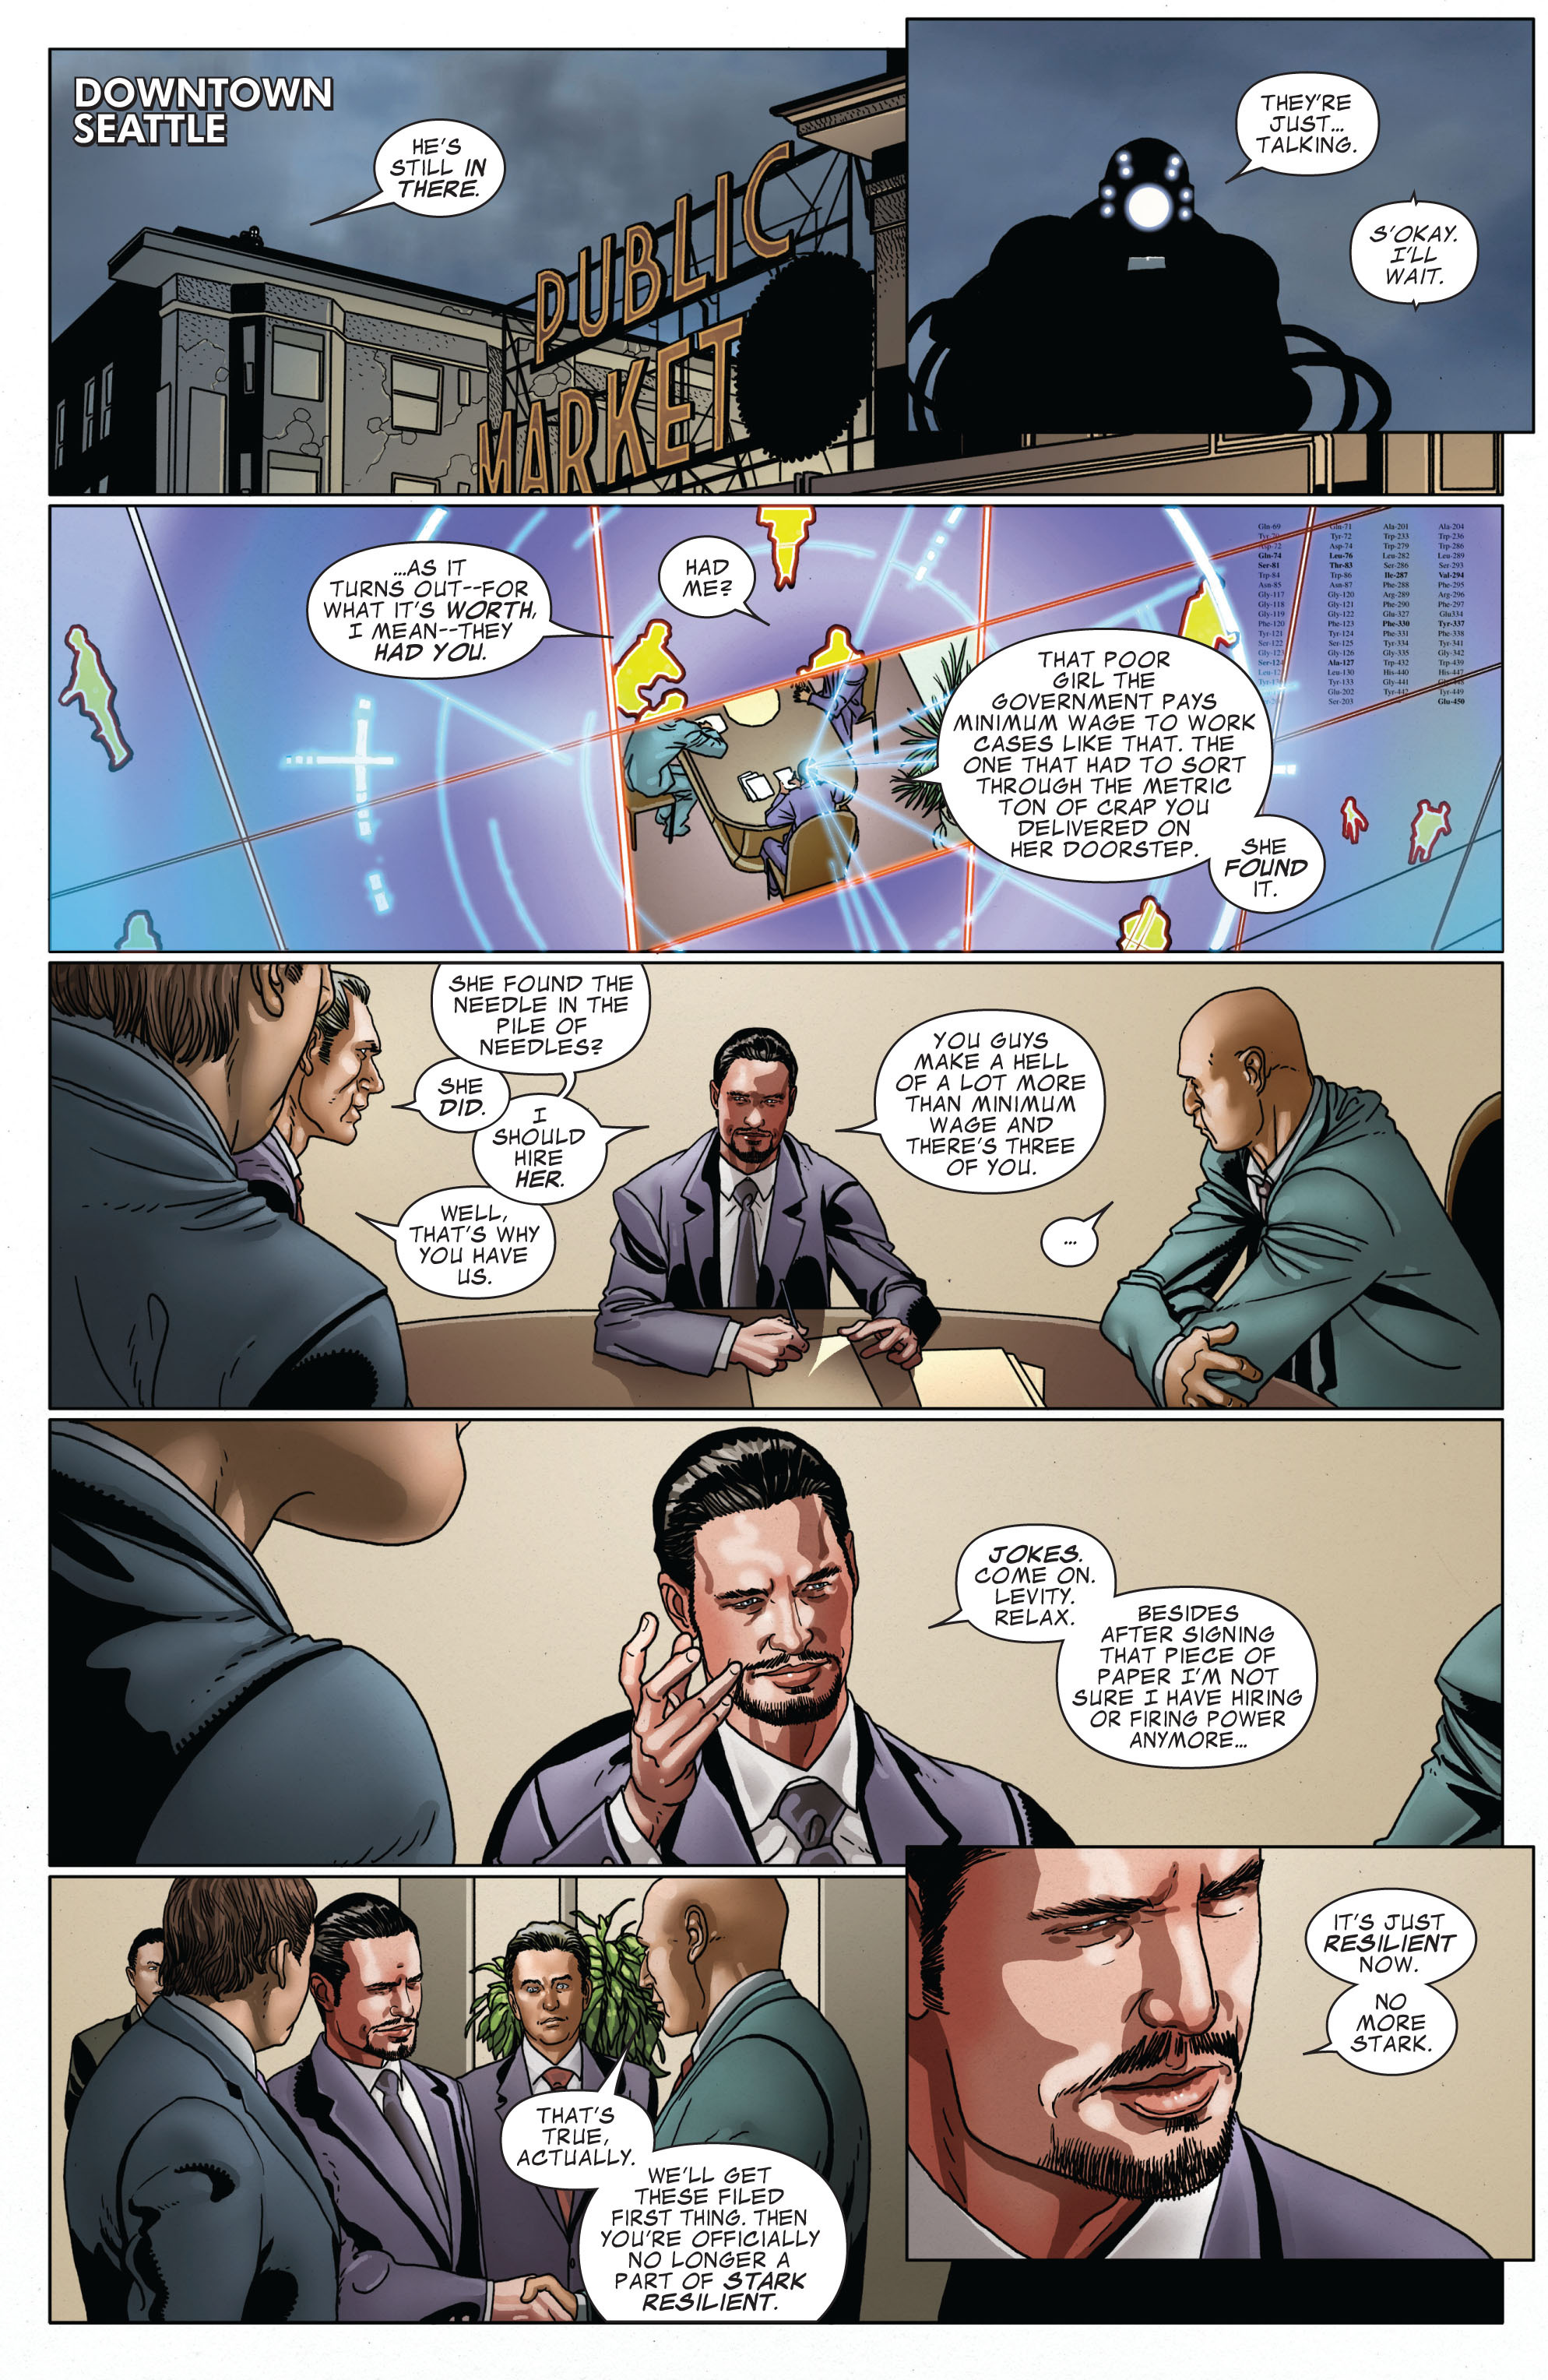 Invincible Iron Man (2008) 519 Page 18